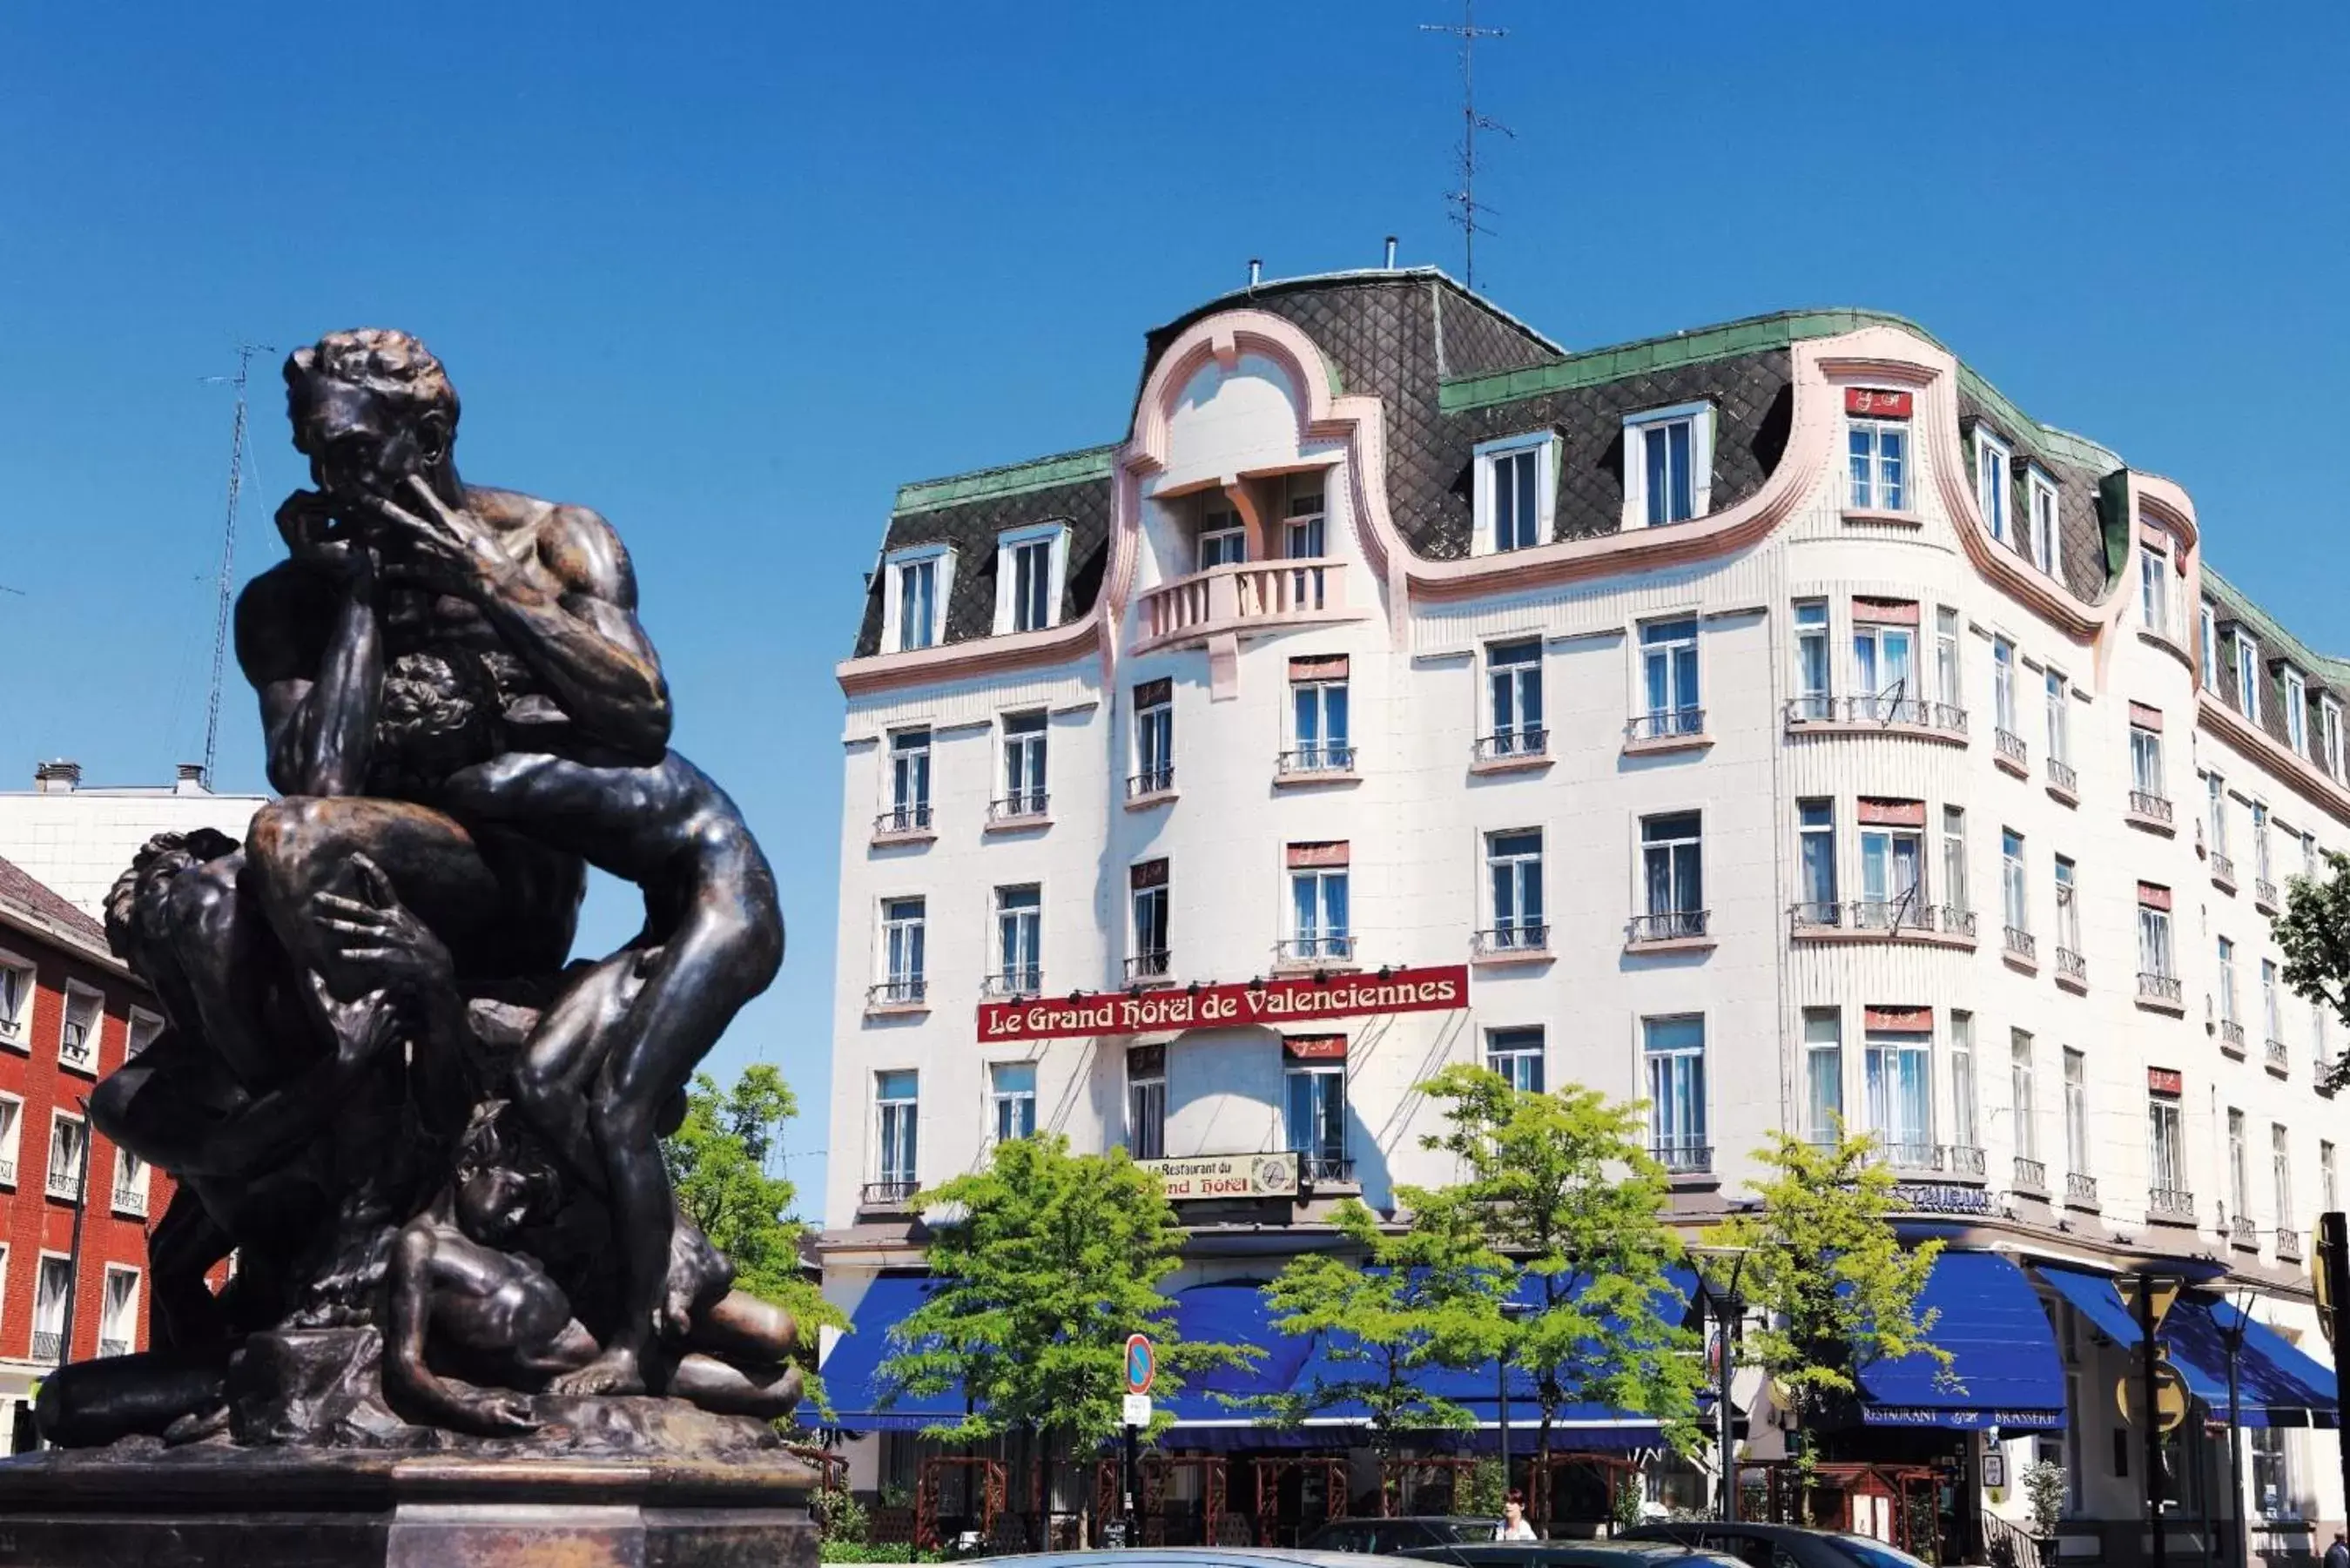 Property building in Le Grand Hotel